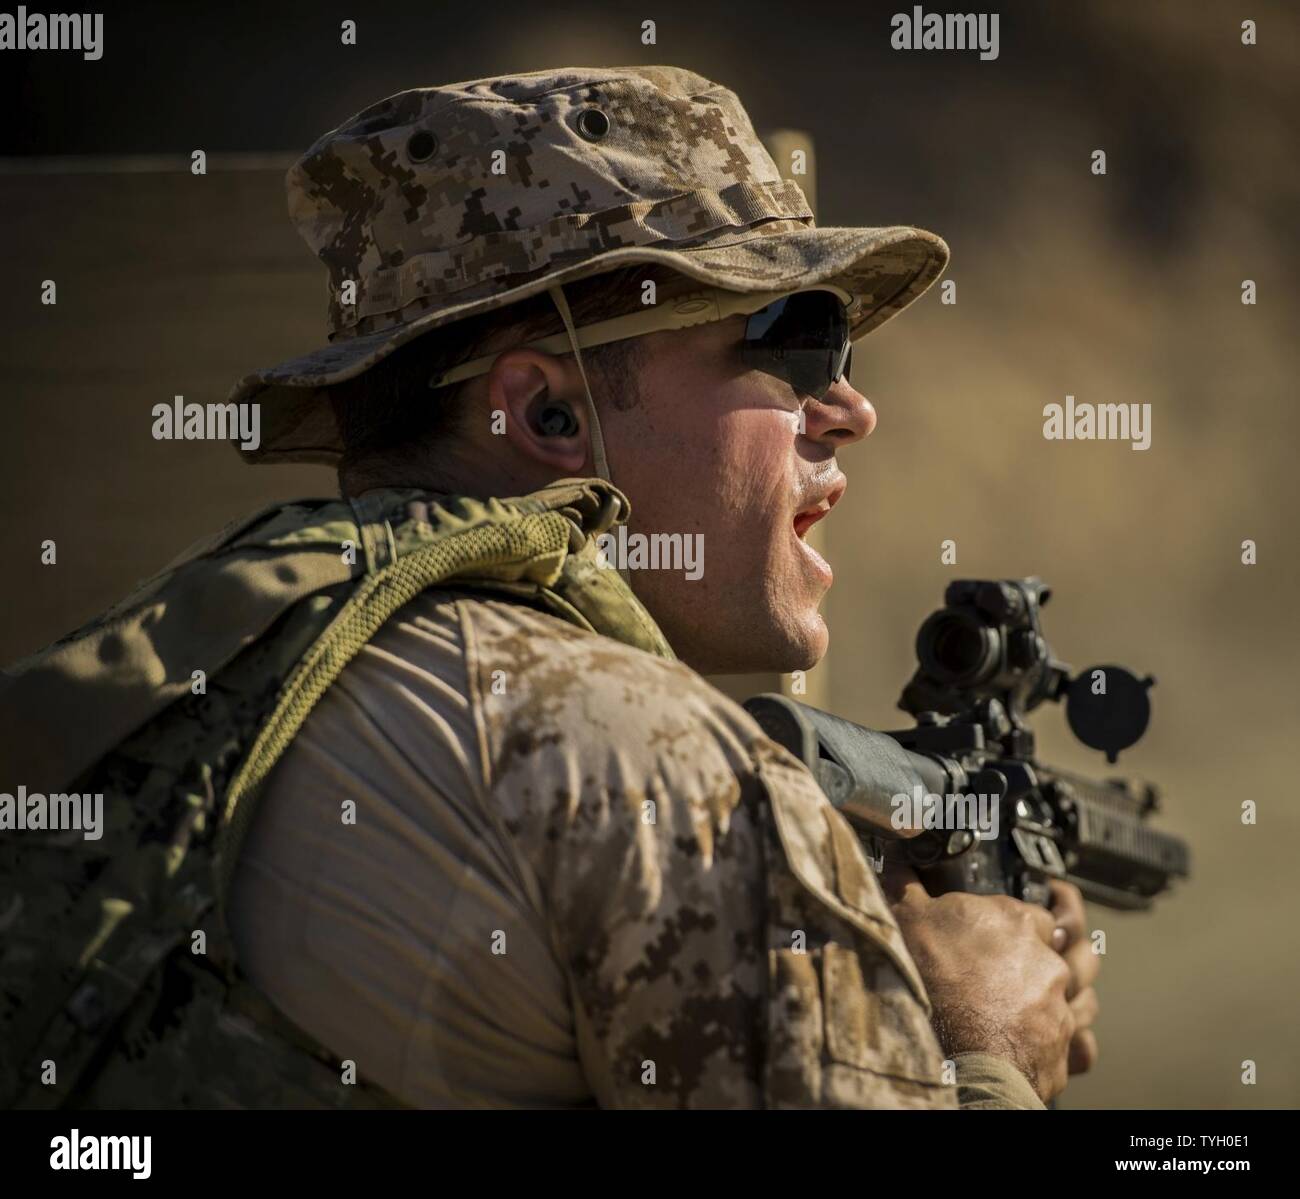 Petty Officer 1st Class Joshua Keim, assigned to Naval Special Warfare Group TWO, participates in a combat shooting course during Fleet Combat Camera Pacific's Winter Quick Shot, Nov. 9, 2016, in Azusa, Calif. Quick Shot is a biannual exercise that provides live-fire and scenario based training to combined joint combat camera assets. Stock Photo